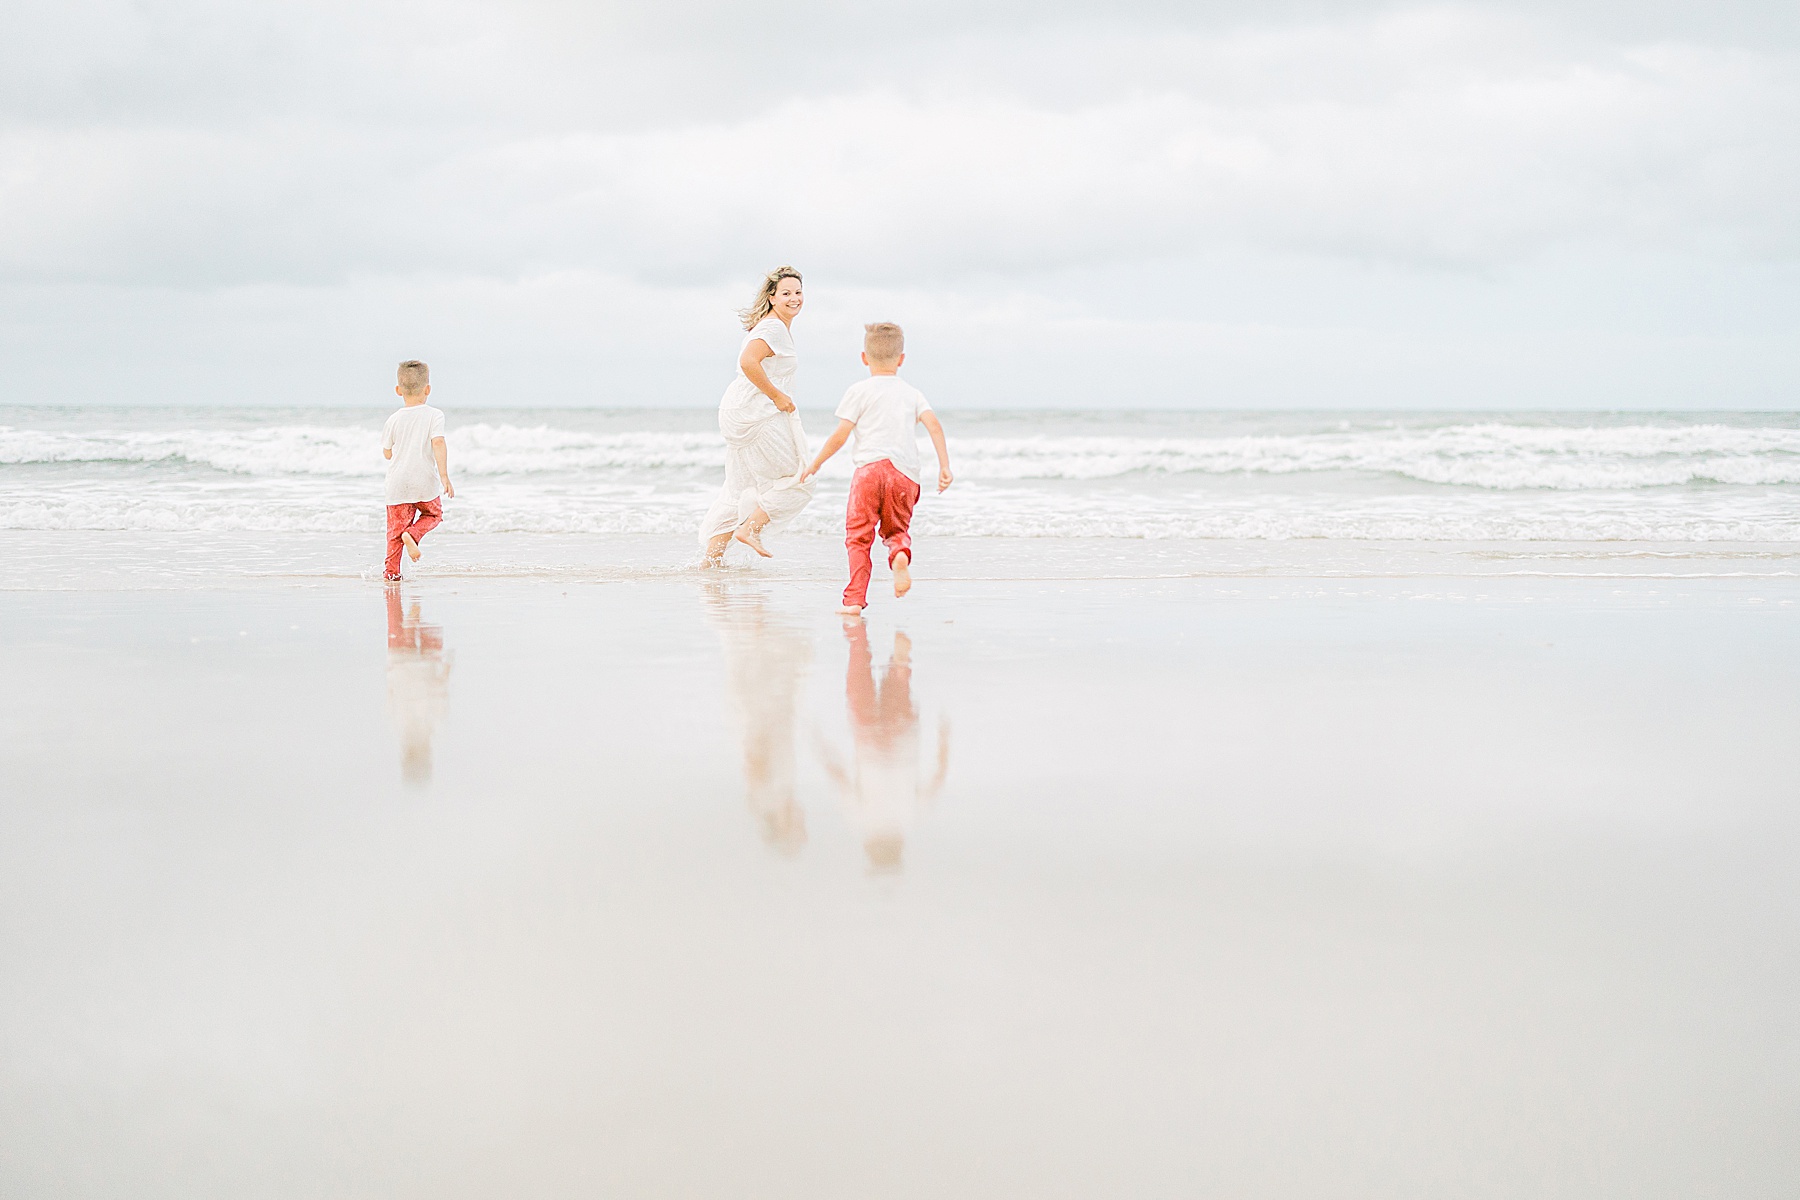 Woman running in white dress on the beach with two children